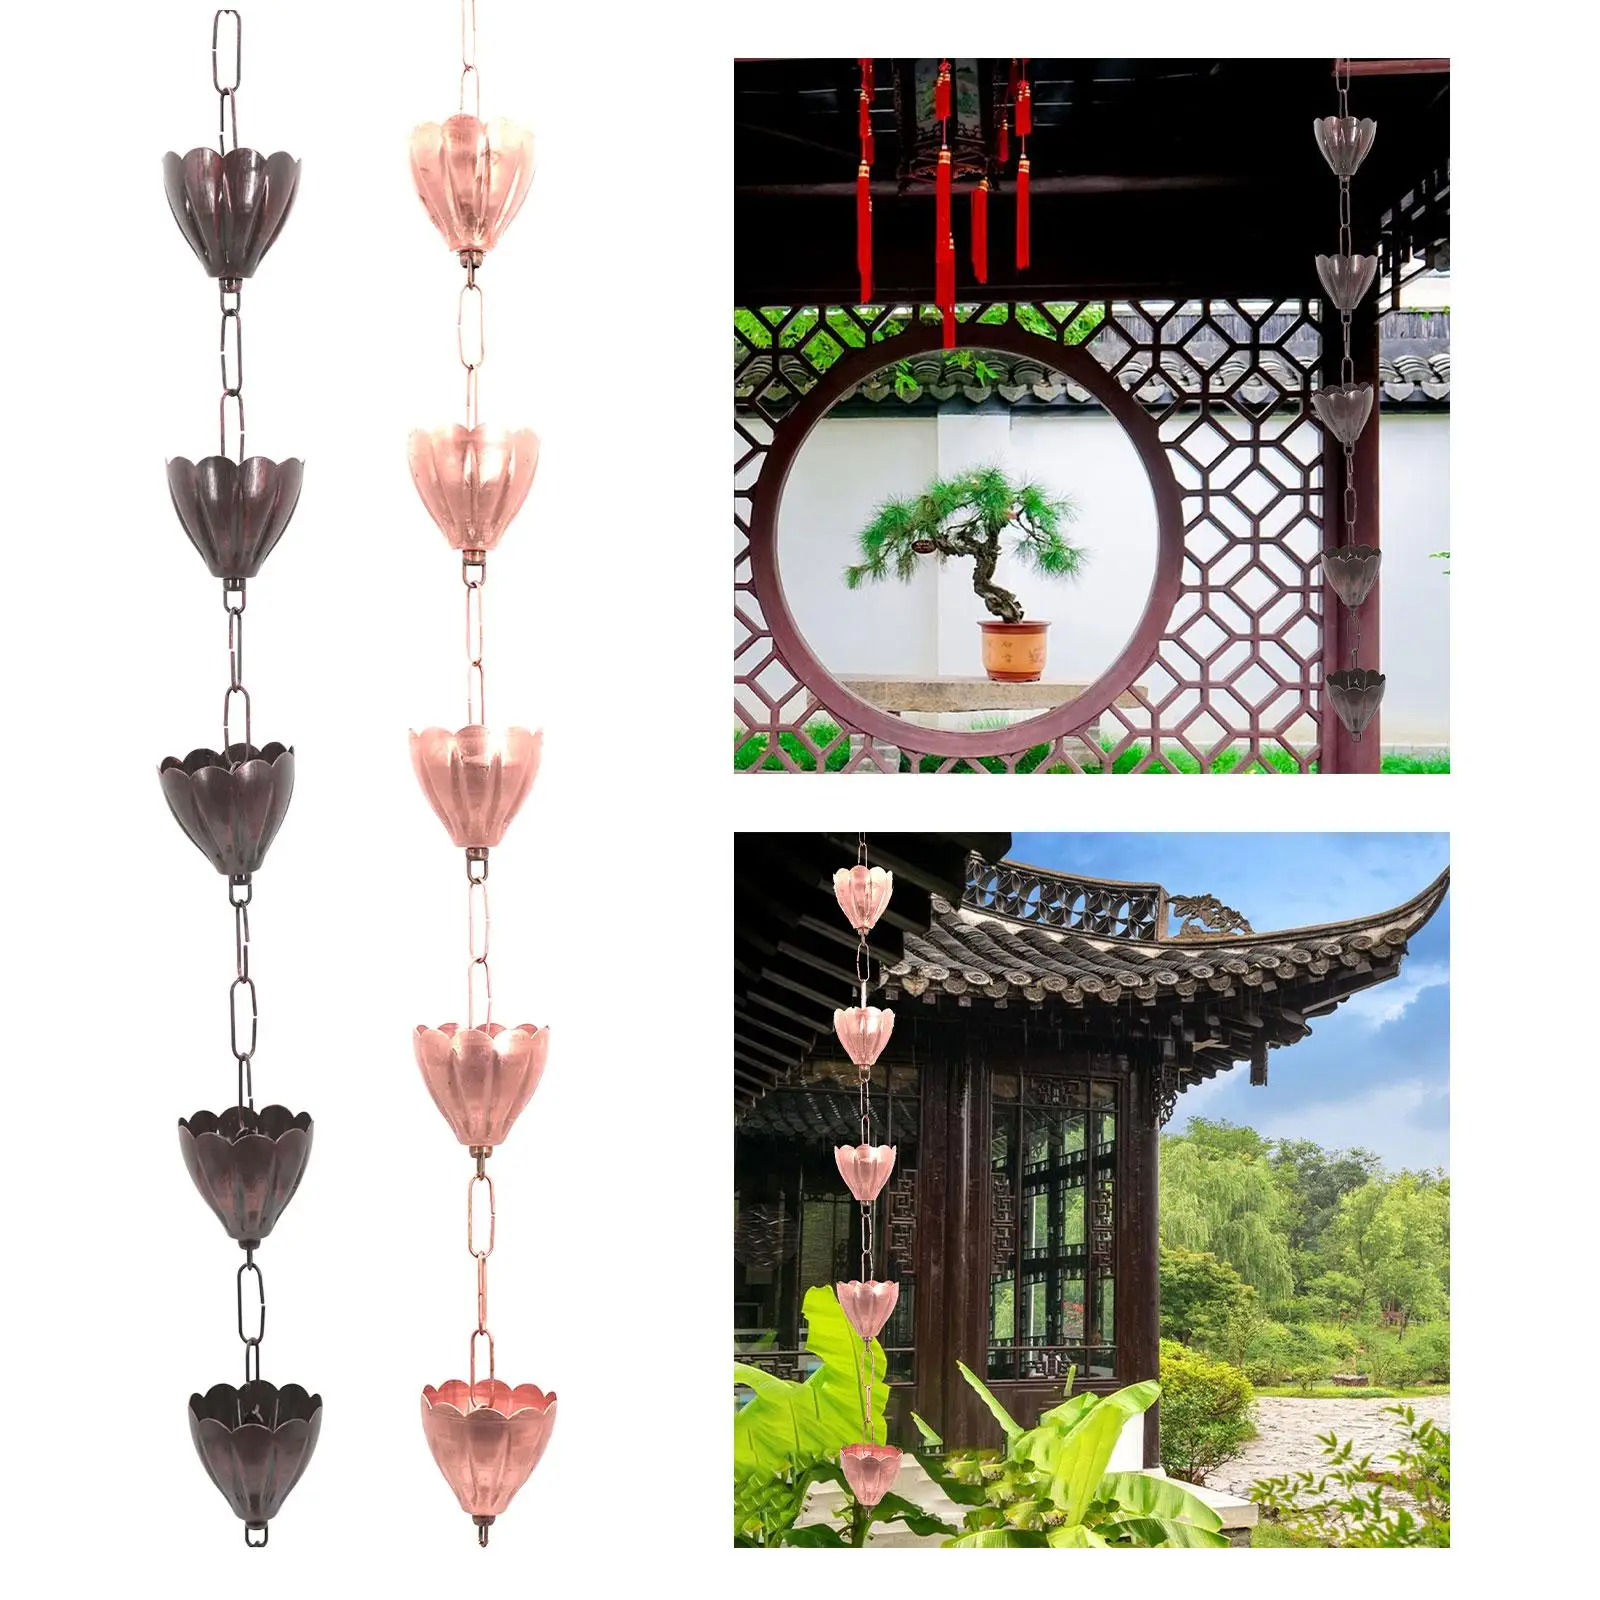 Rain Chain Display Rain Chain Cups Gutter Downspouts Functional Outdoor Metal Rain Chain for Awnings Outdoor Sheds Roofs Gazebos